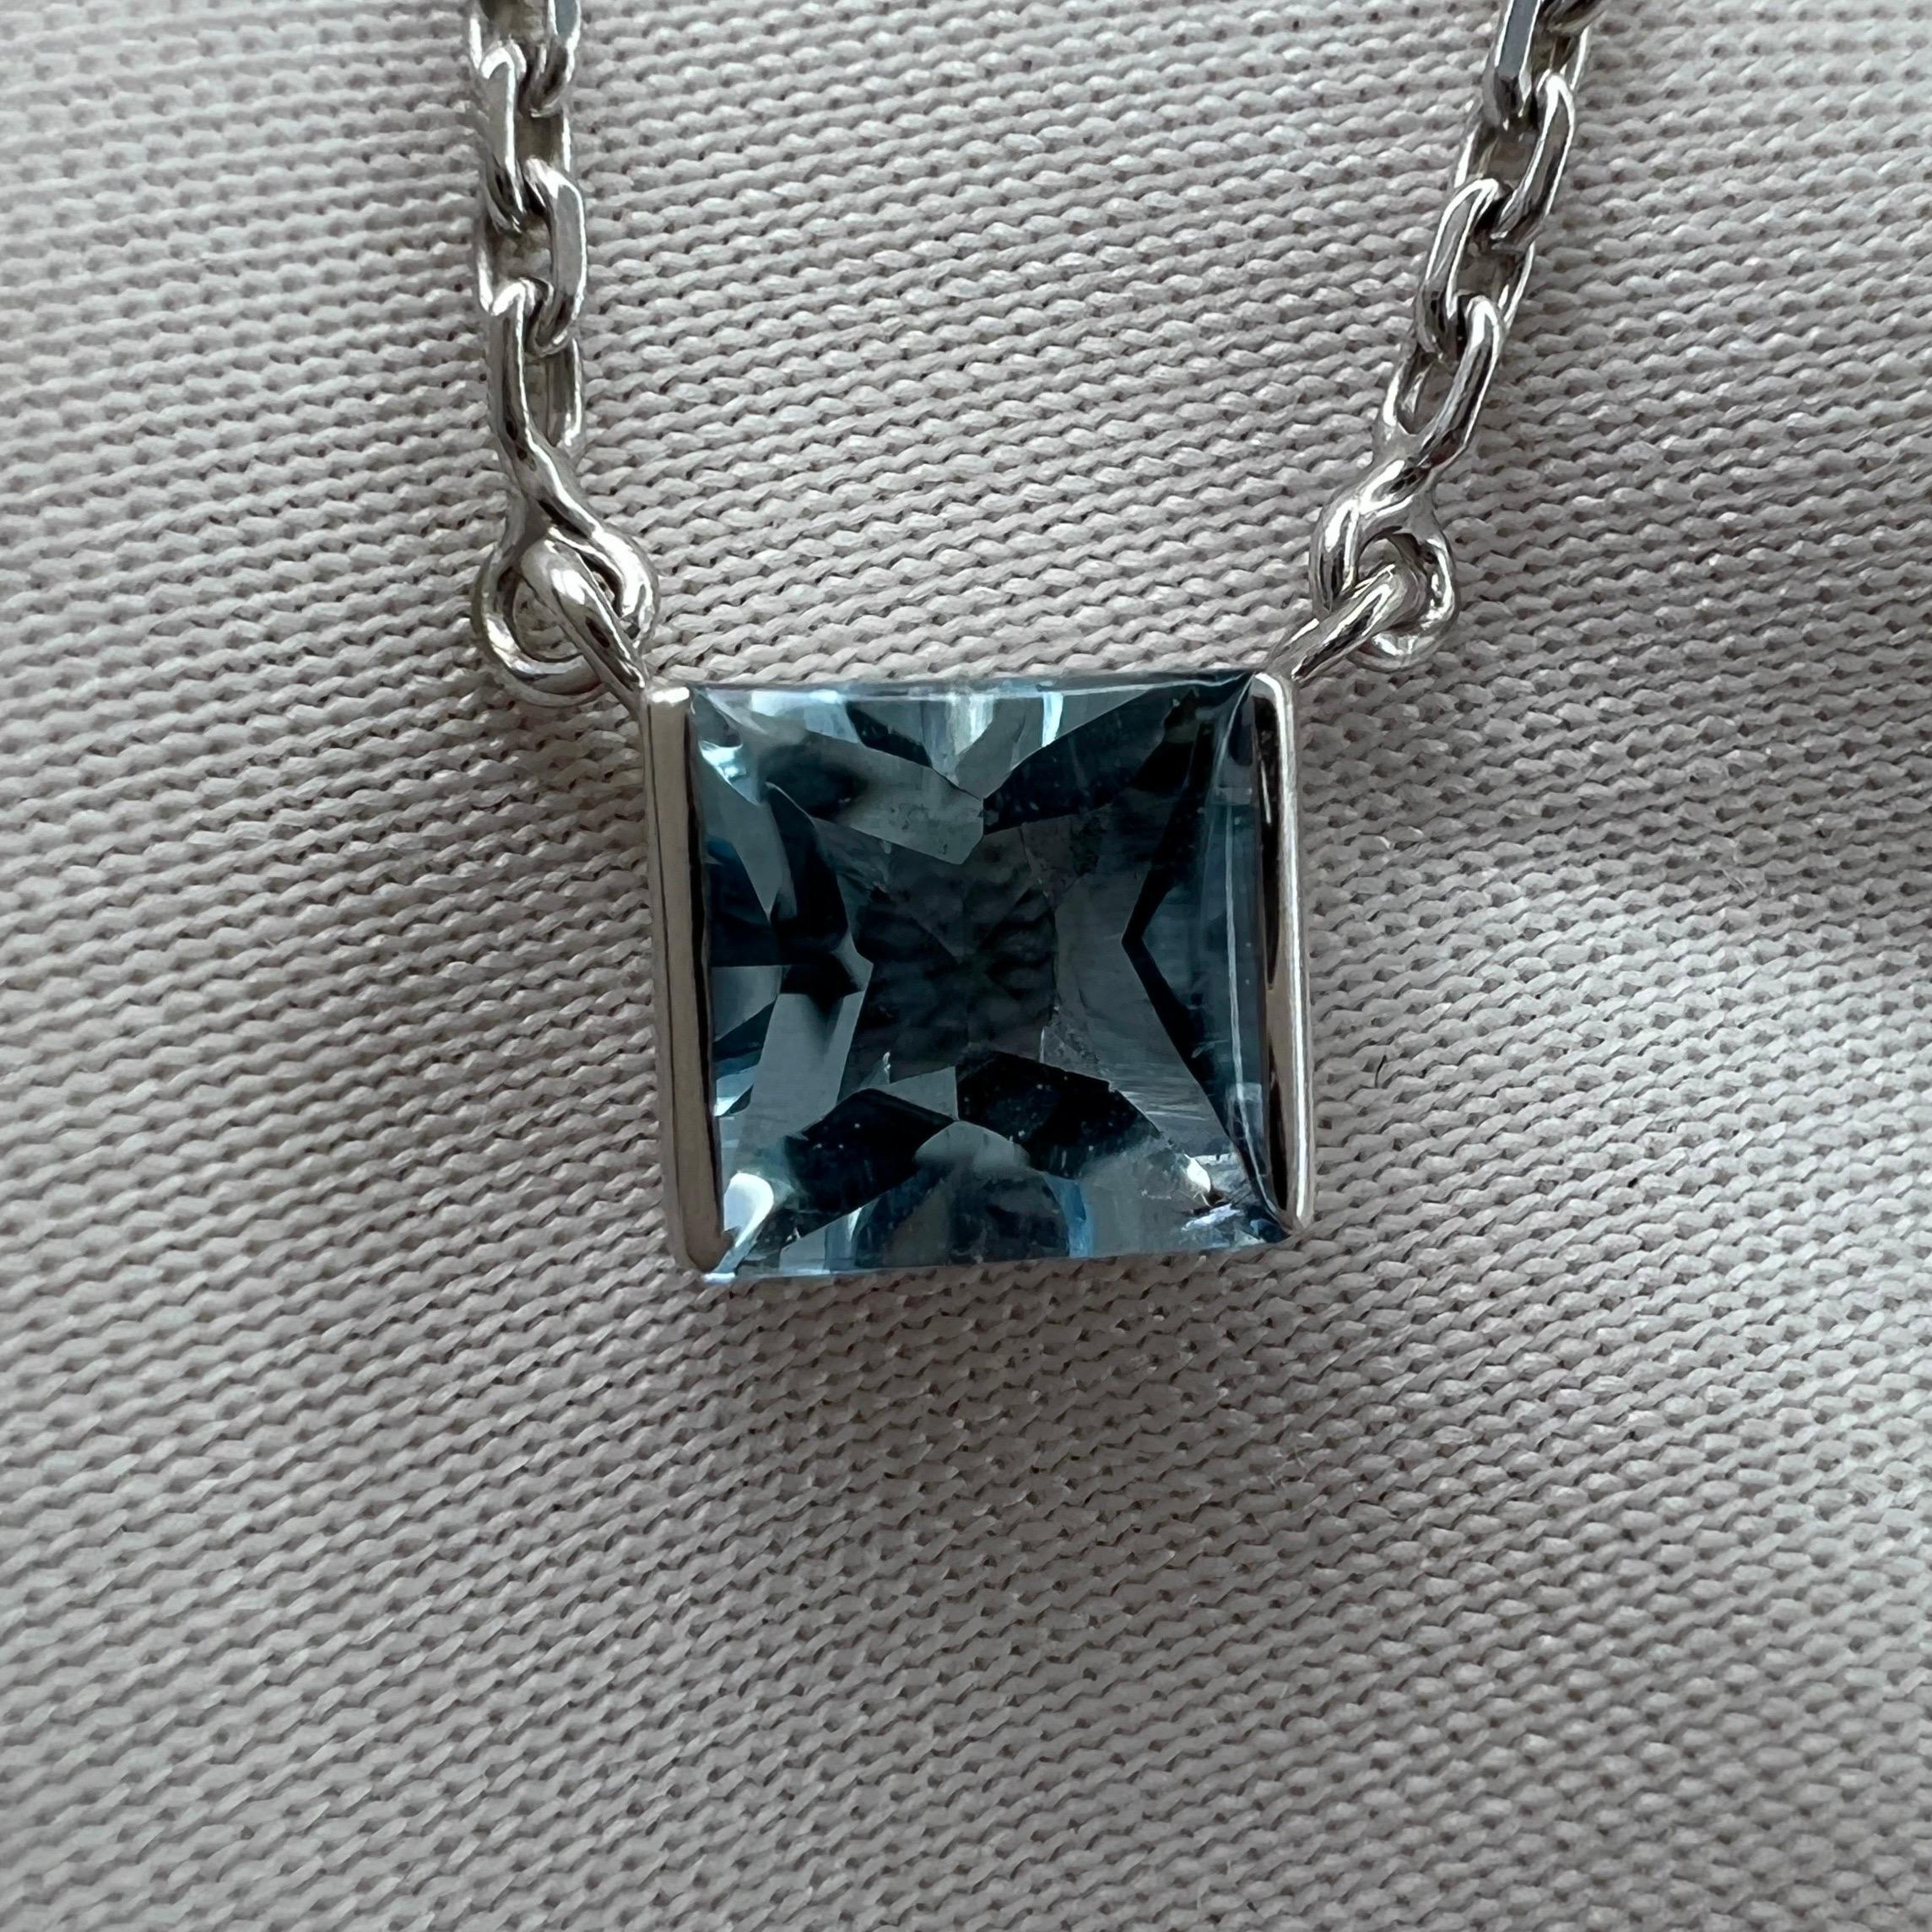 Vintage Cartier Blue Aquamarine 18 Karat White Gold Pendant Necklace.

Stunning white gold pendant set with a 5.6mm tension set fine blue aquamarine. 
Fine jewellery houses like Cartier only use the finest of gemstones and this aquamarine is no